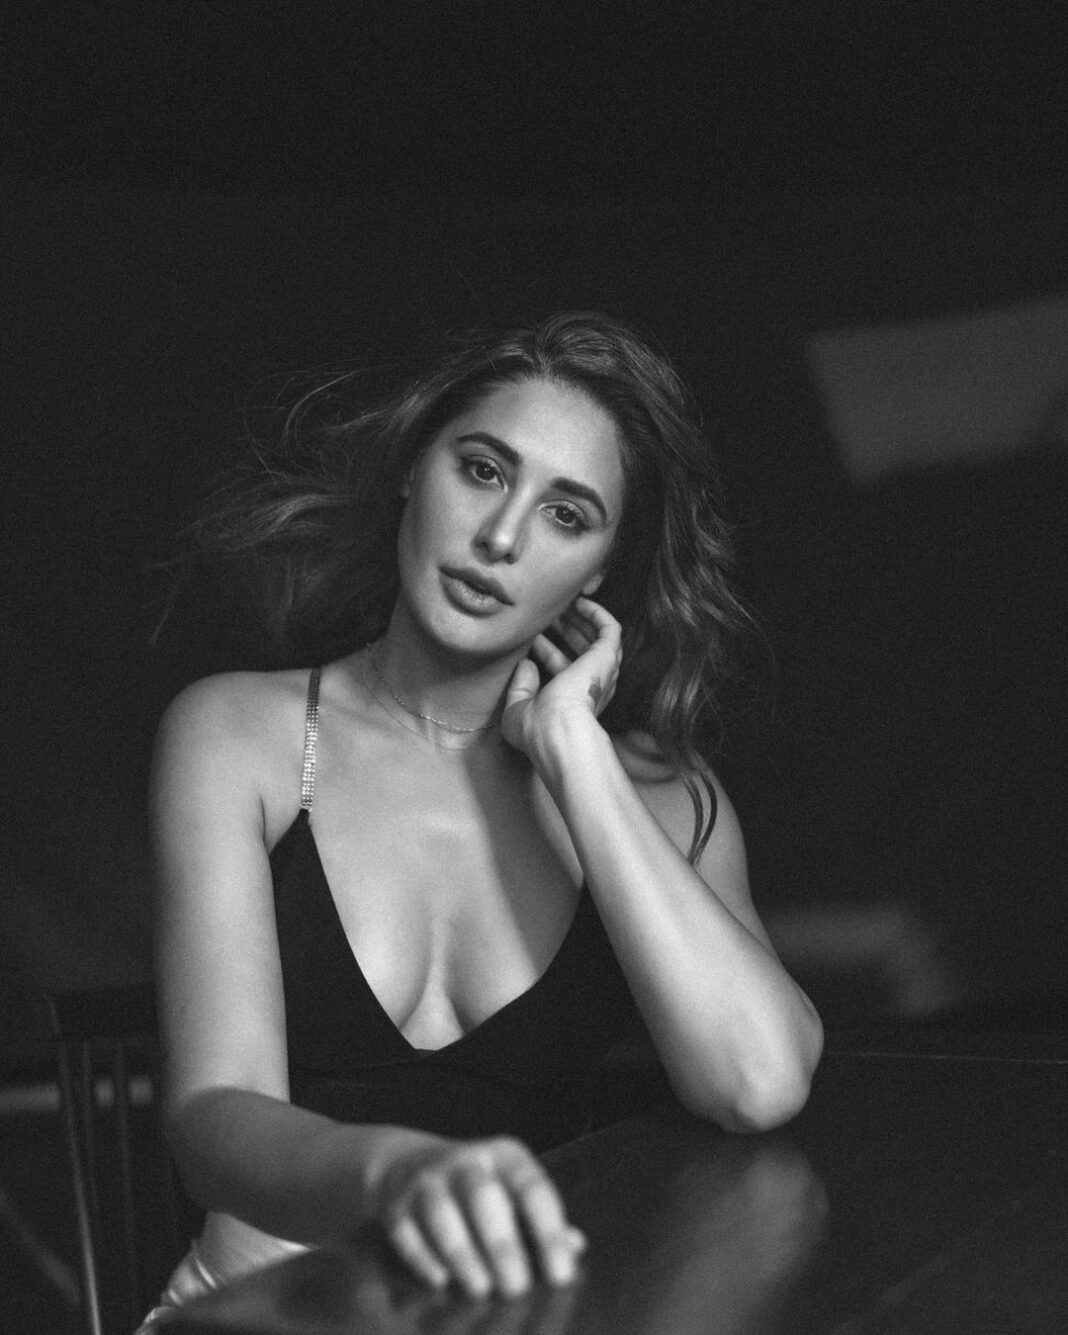 Nargis Fakhir Instagram - Never give up because great things take time! . . . : . . . 📸 @tejasnerurkarr 👗 @alliaalrufai 💄 @ajayvrao721 Hair @shefali_hairstylist.81 . . #nevergiveup #photography #blackandwhite #portraitphotography #keepgoing #love #life